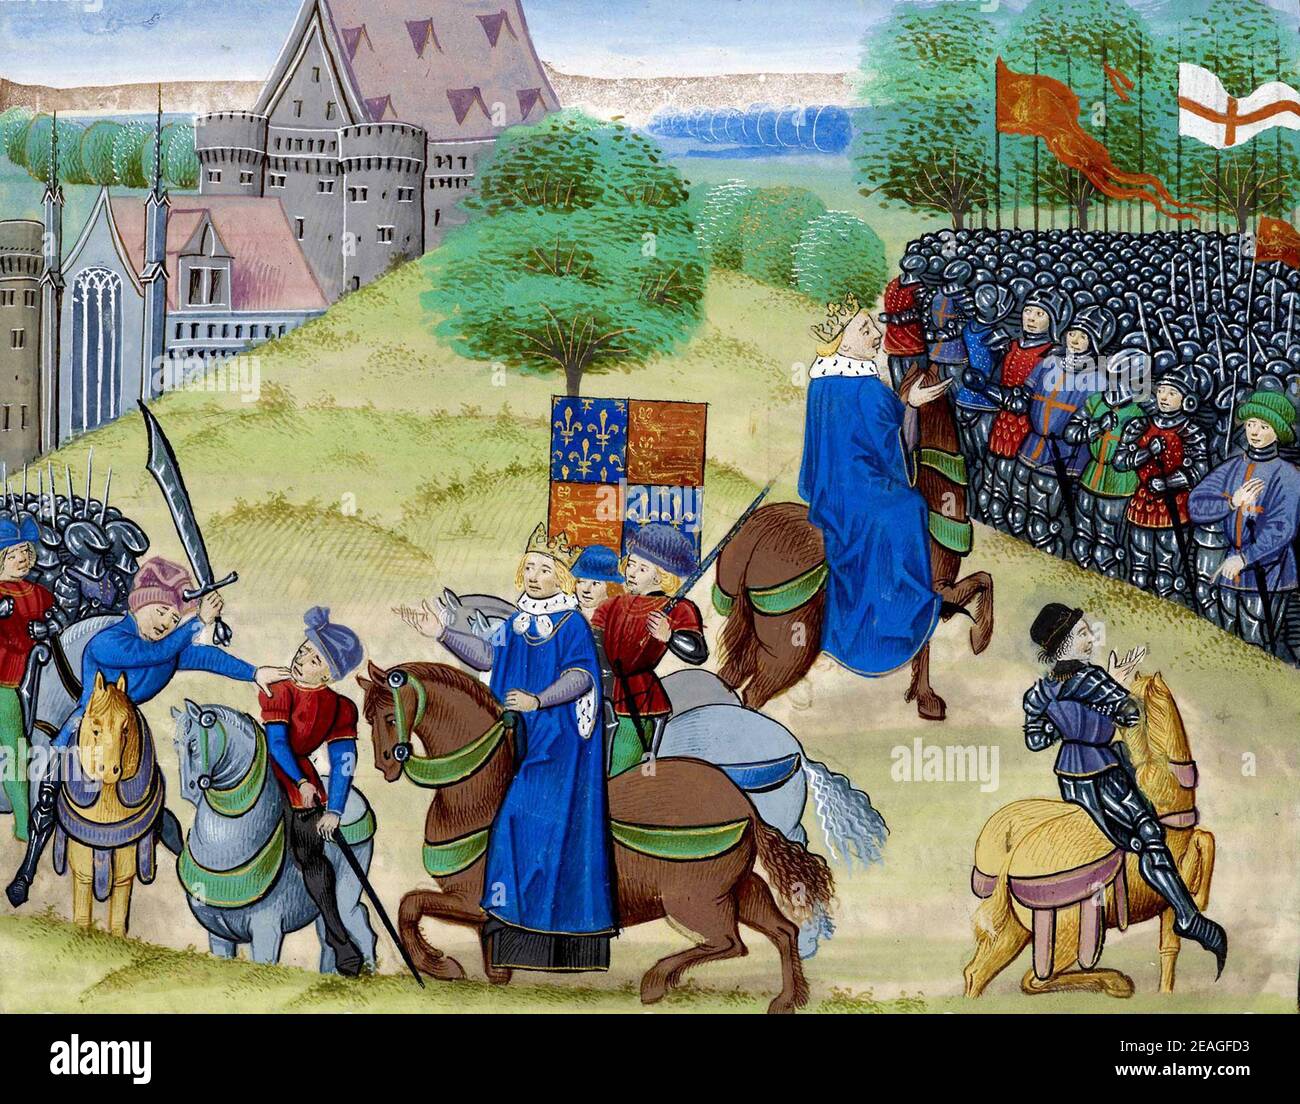 The death of Wat Tyler, Walter 'Wat' Tyler (1341 – 1381) leader of the 1381 Peasants' Revolt in England. He marched a group of rebels from Canterbury to London to oppose the institution of a poll tax and to demand economic and social reforms. While the brief rebellion enjoyed early success, Tyler was killed by officers loyal to King Richard II during negotiations at Smithfield, London. Stock Photo